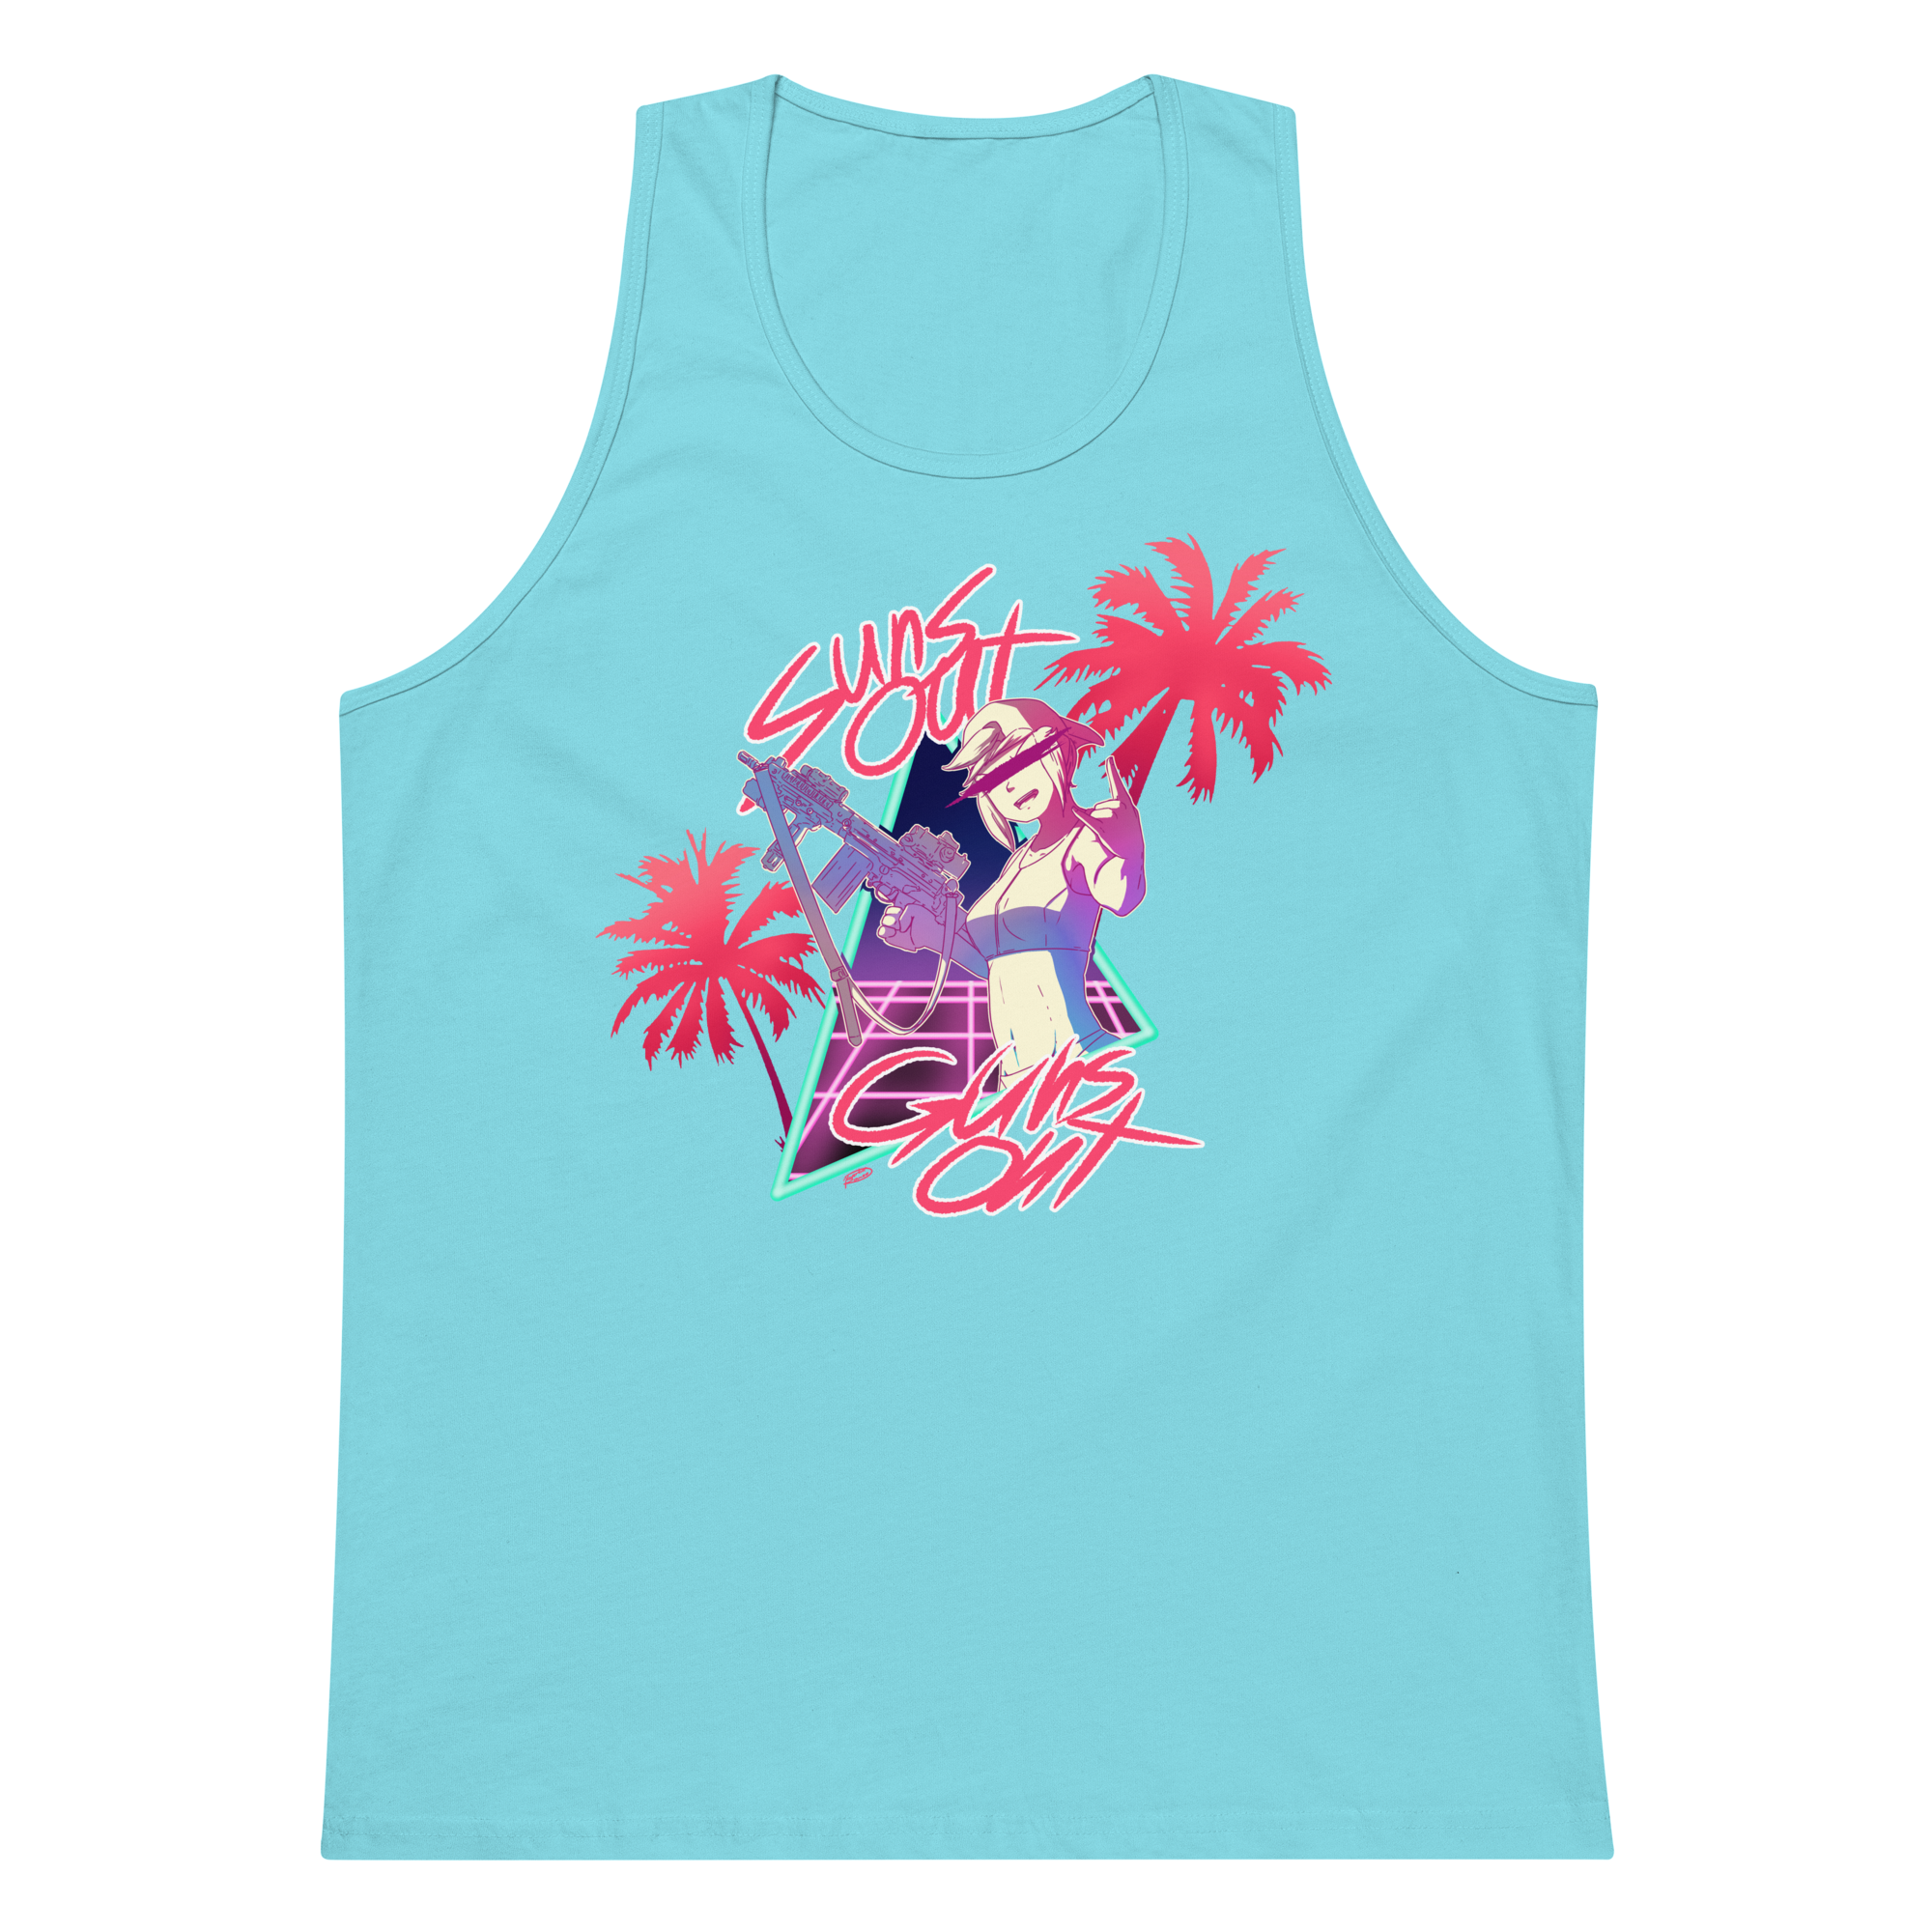 Suns out Guns out [old school design]